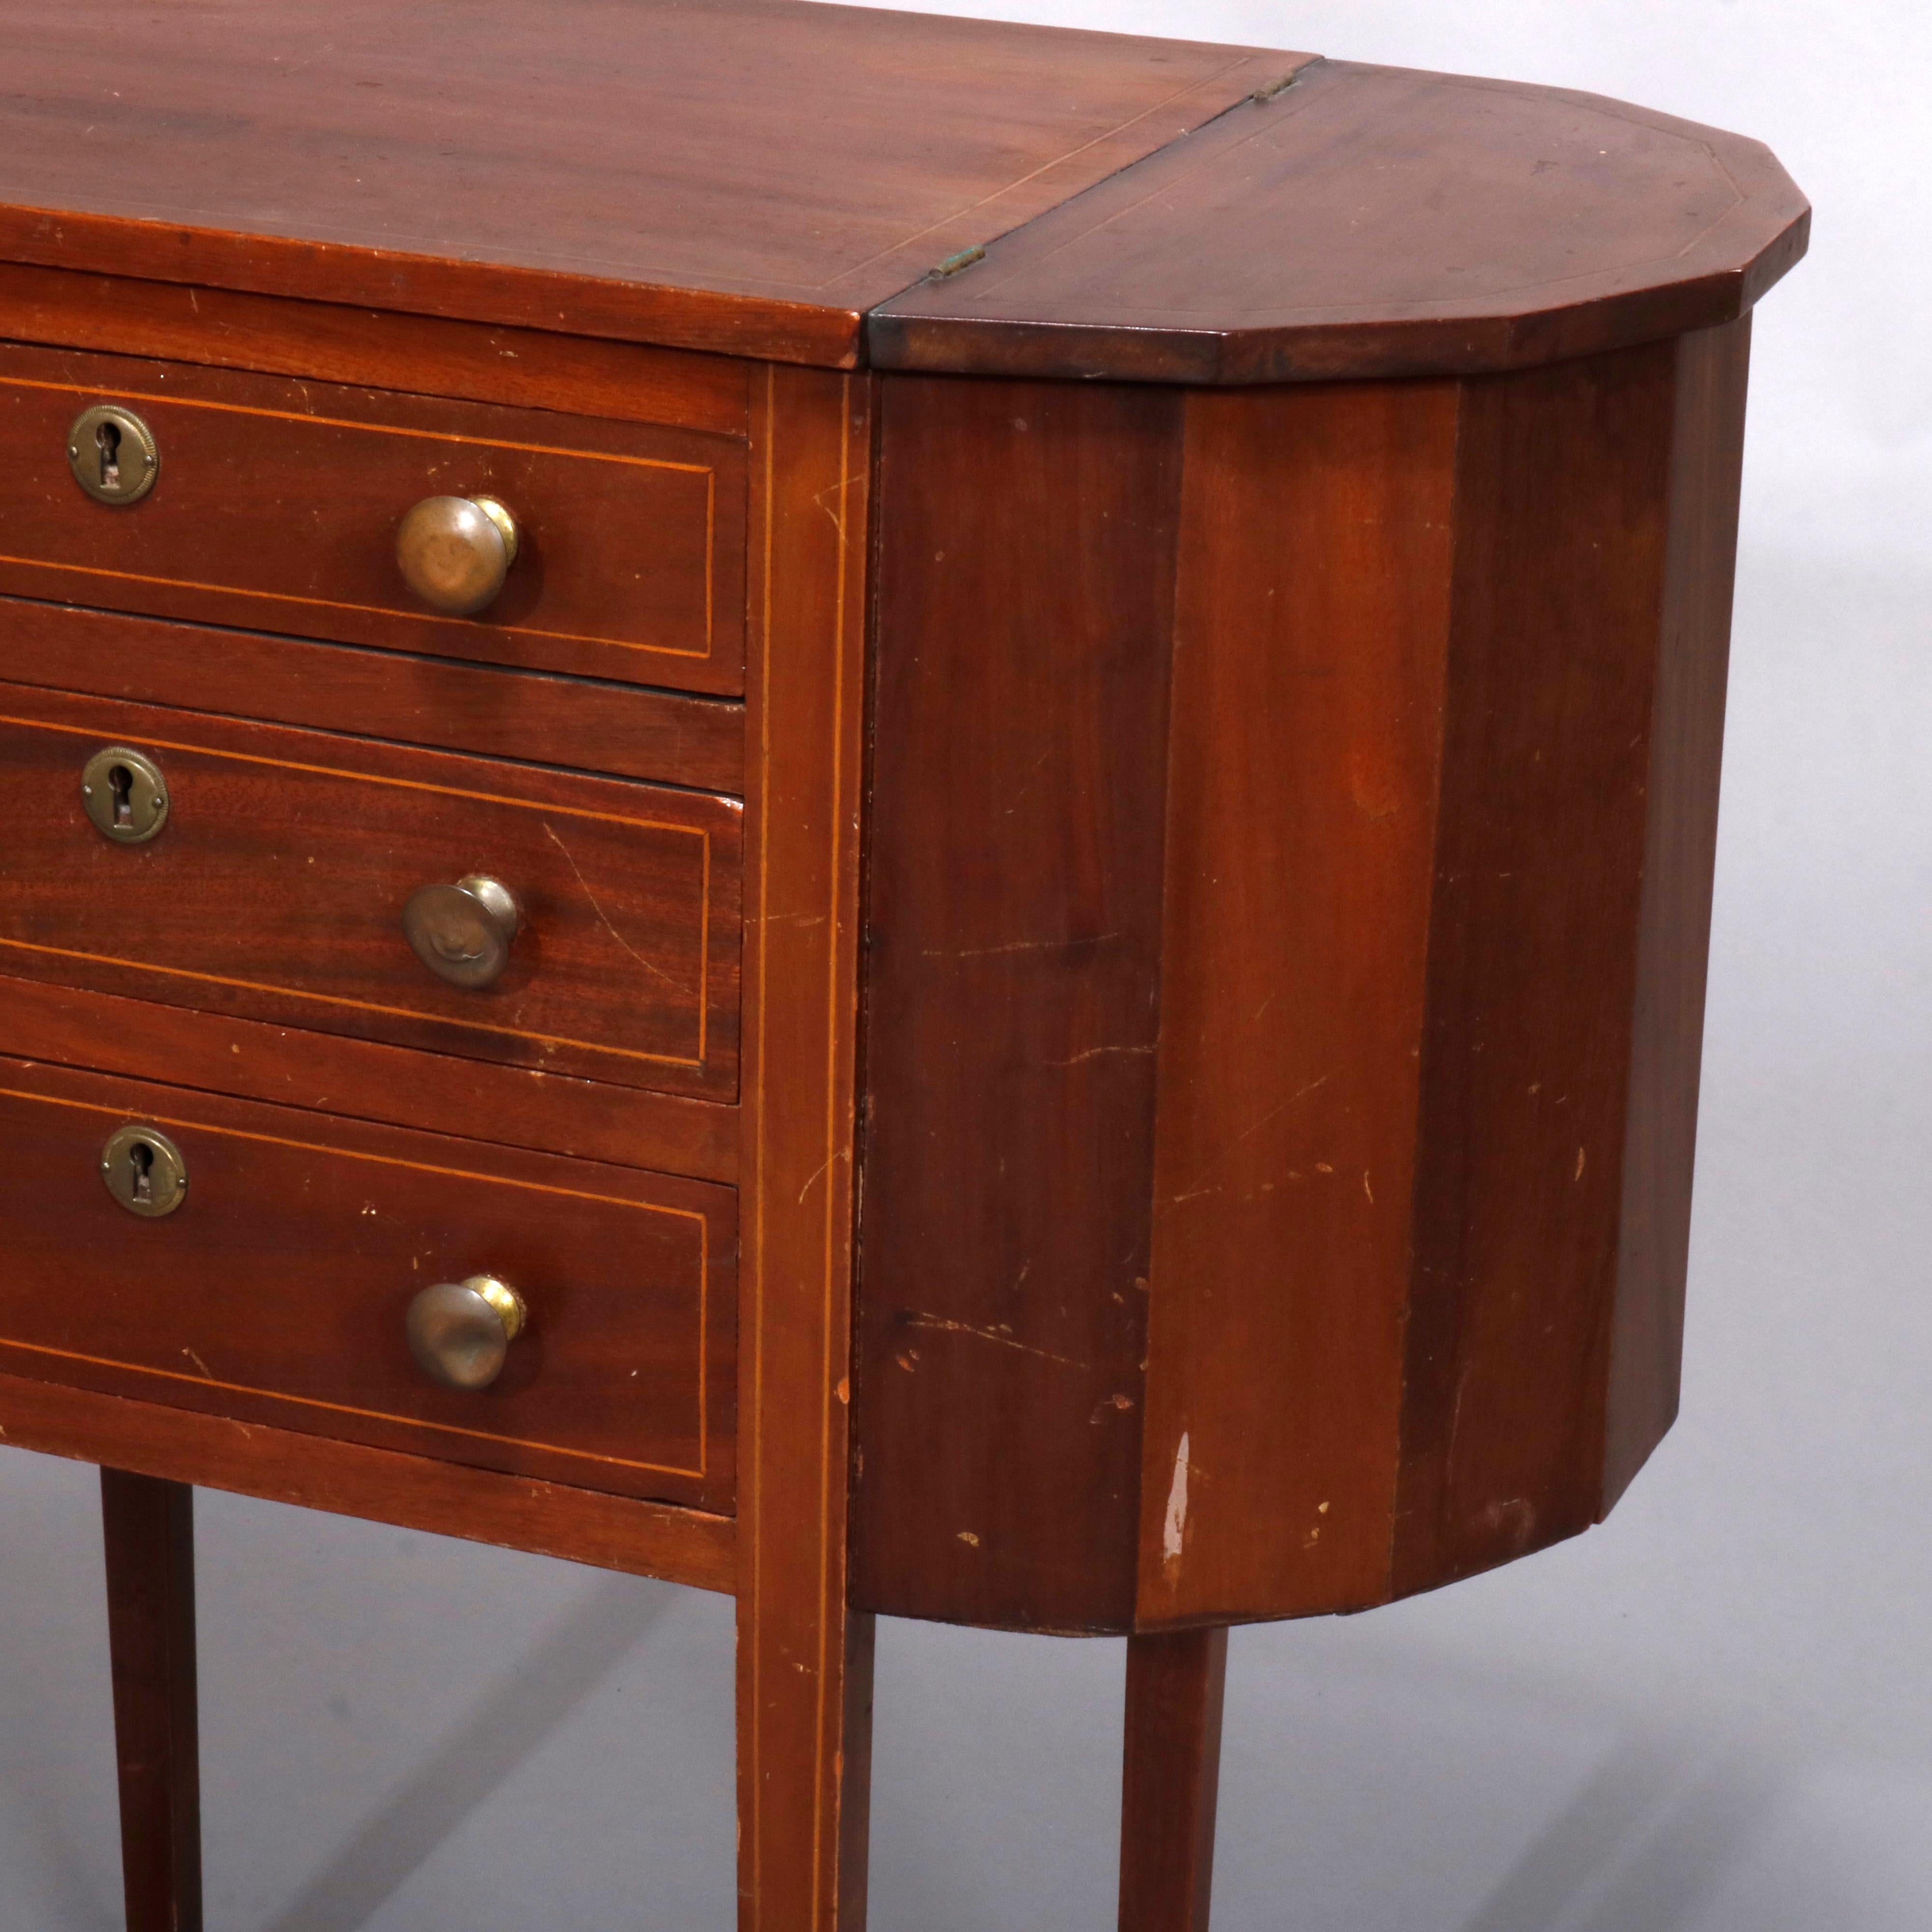 An antique Martha Washington sewing stand or cabinet offers mahogany construction with 
central tower having graduated drawers and flanked by faceted demilune project pockets, raised on tapered satinwood banded square legs, circa 1930

Measures-